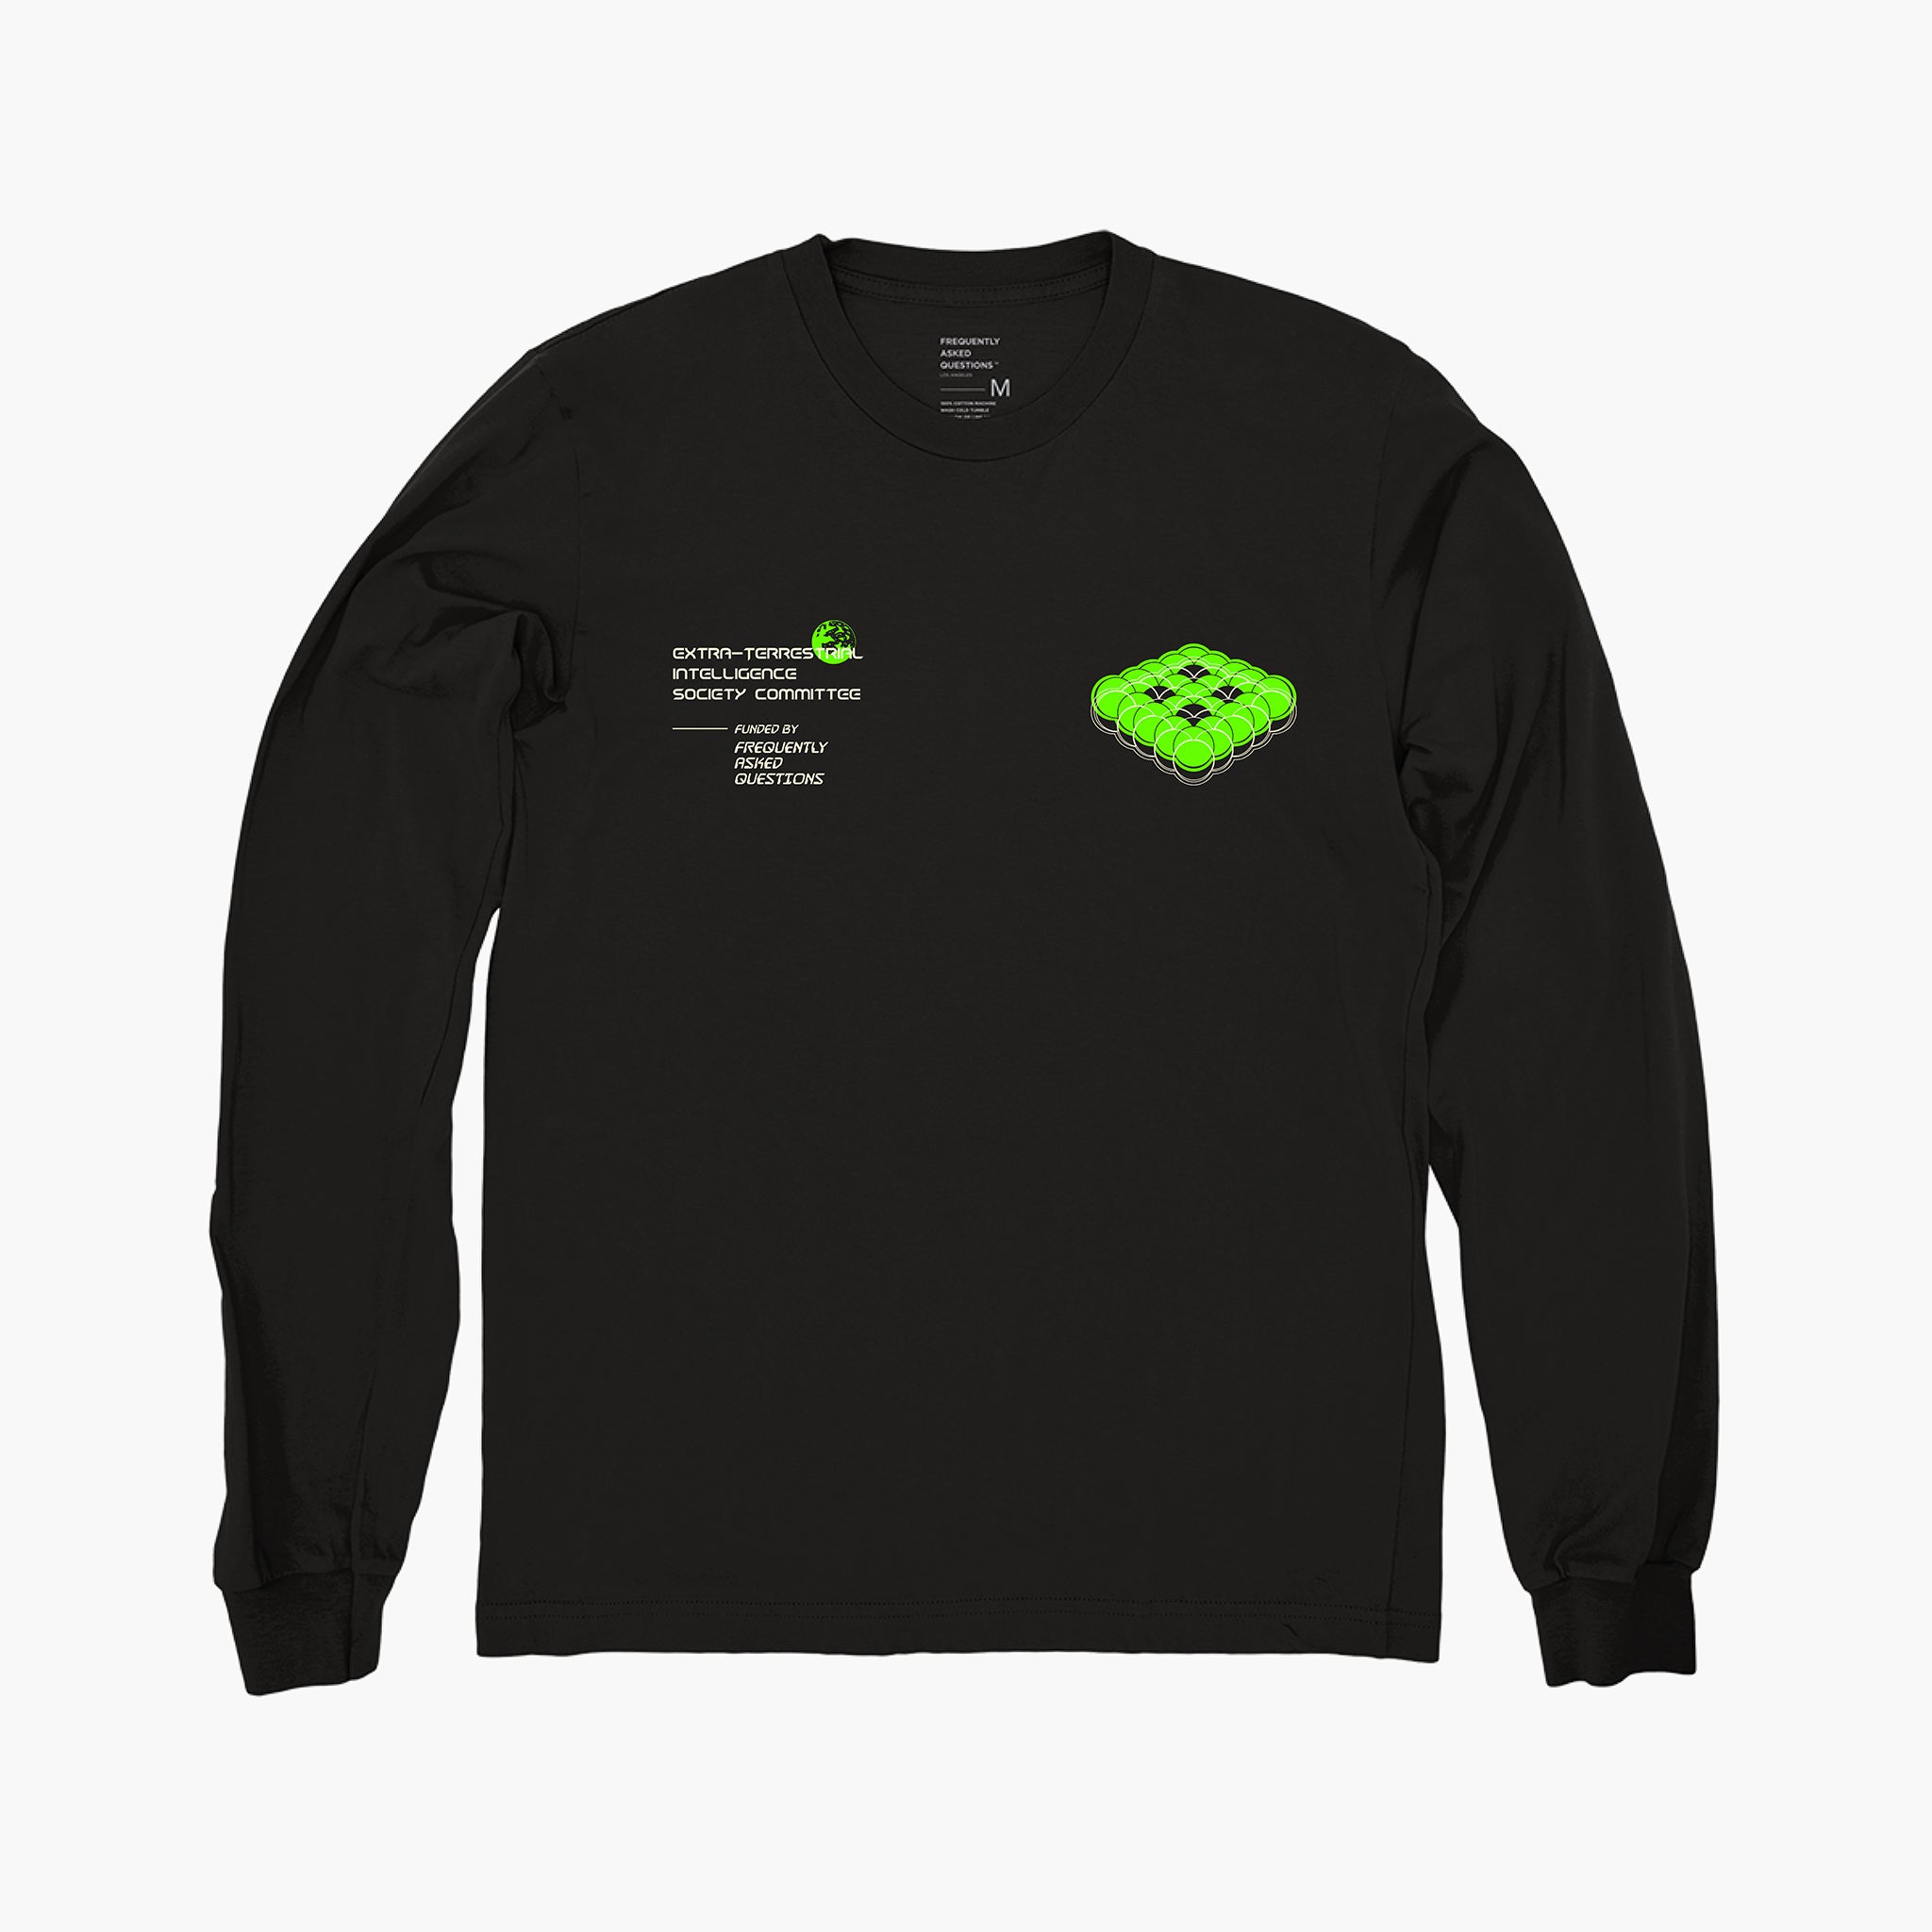 E.T.I.S.C. Long Sleeve T-Shirt - Frequently Asked Questions